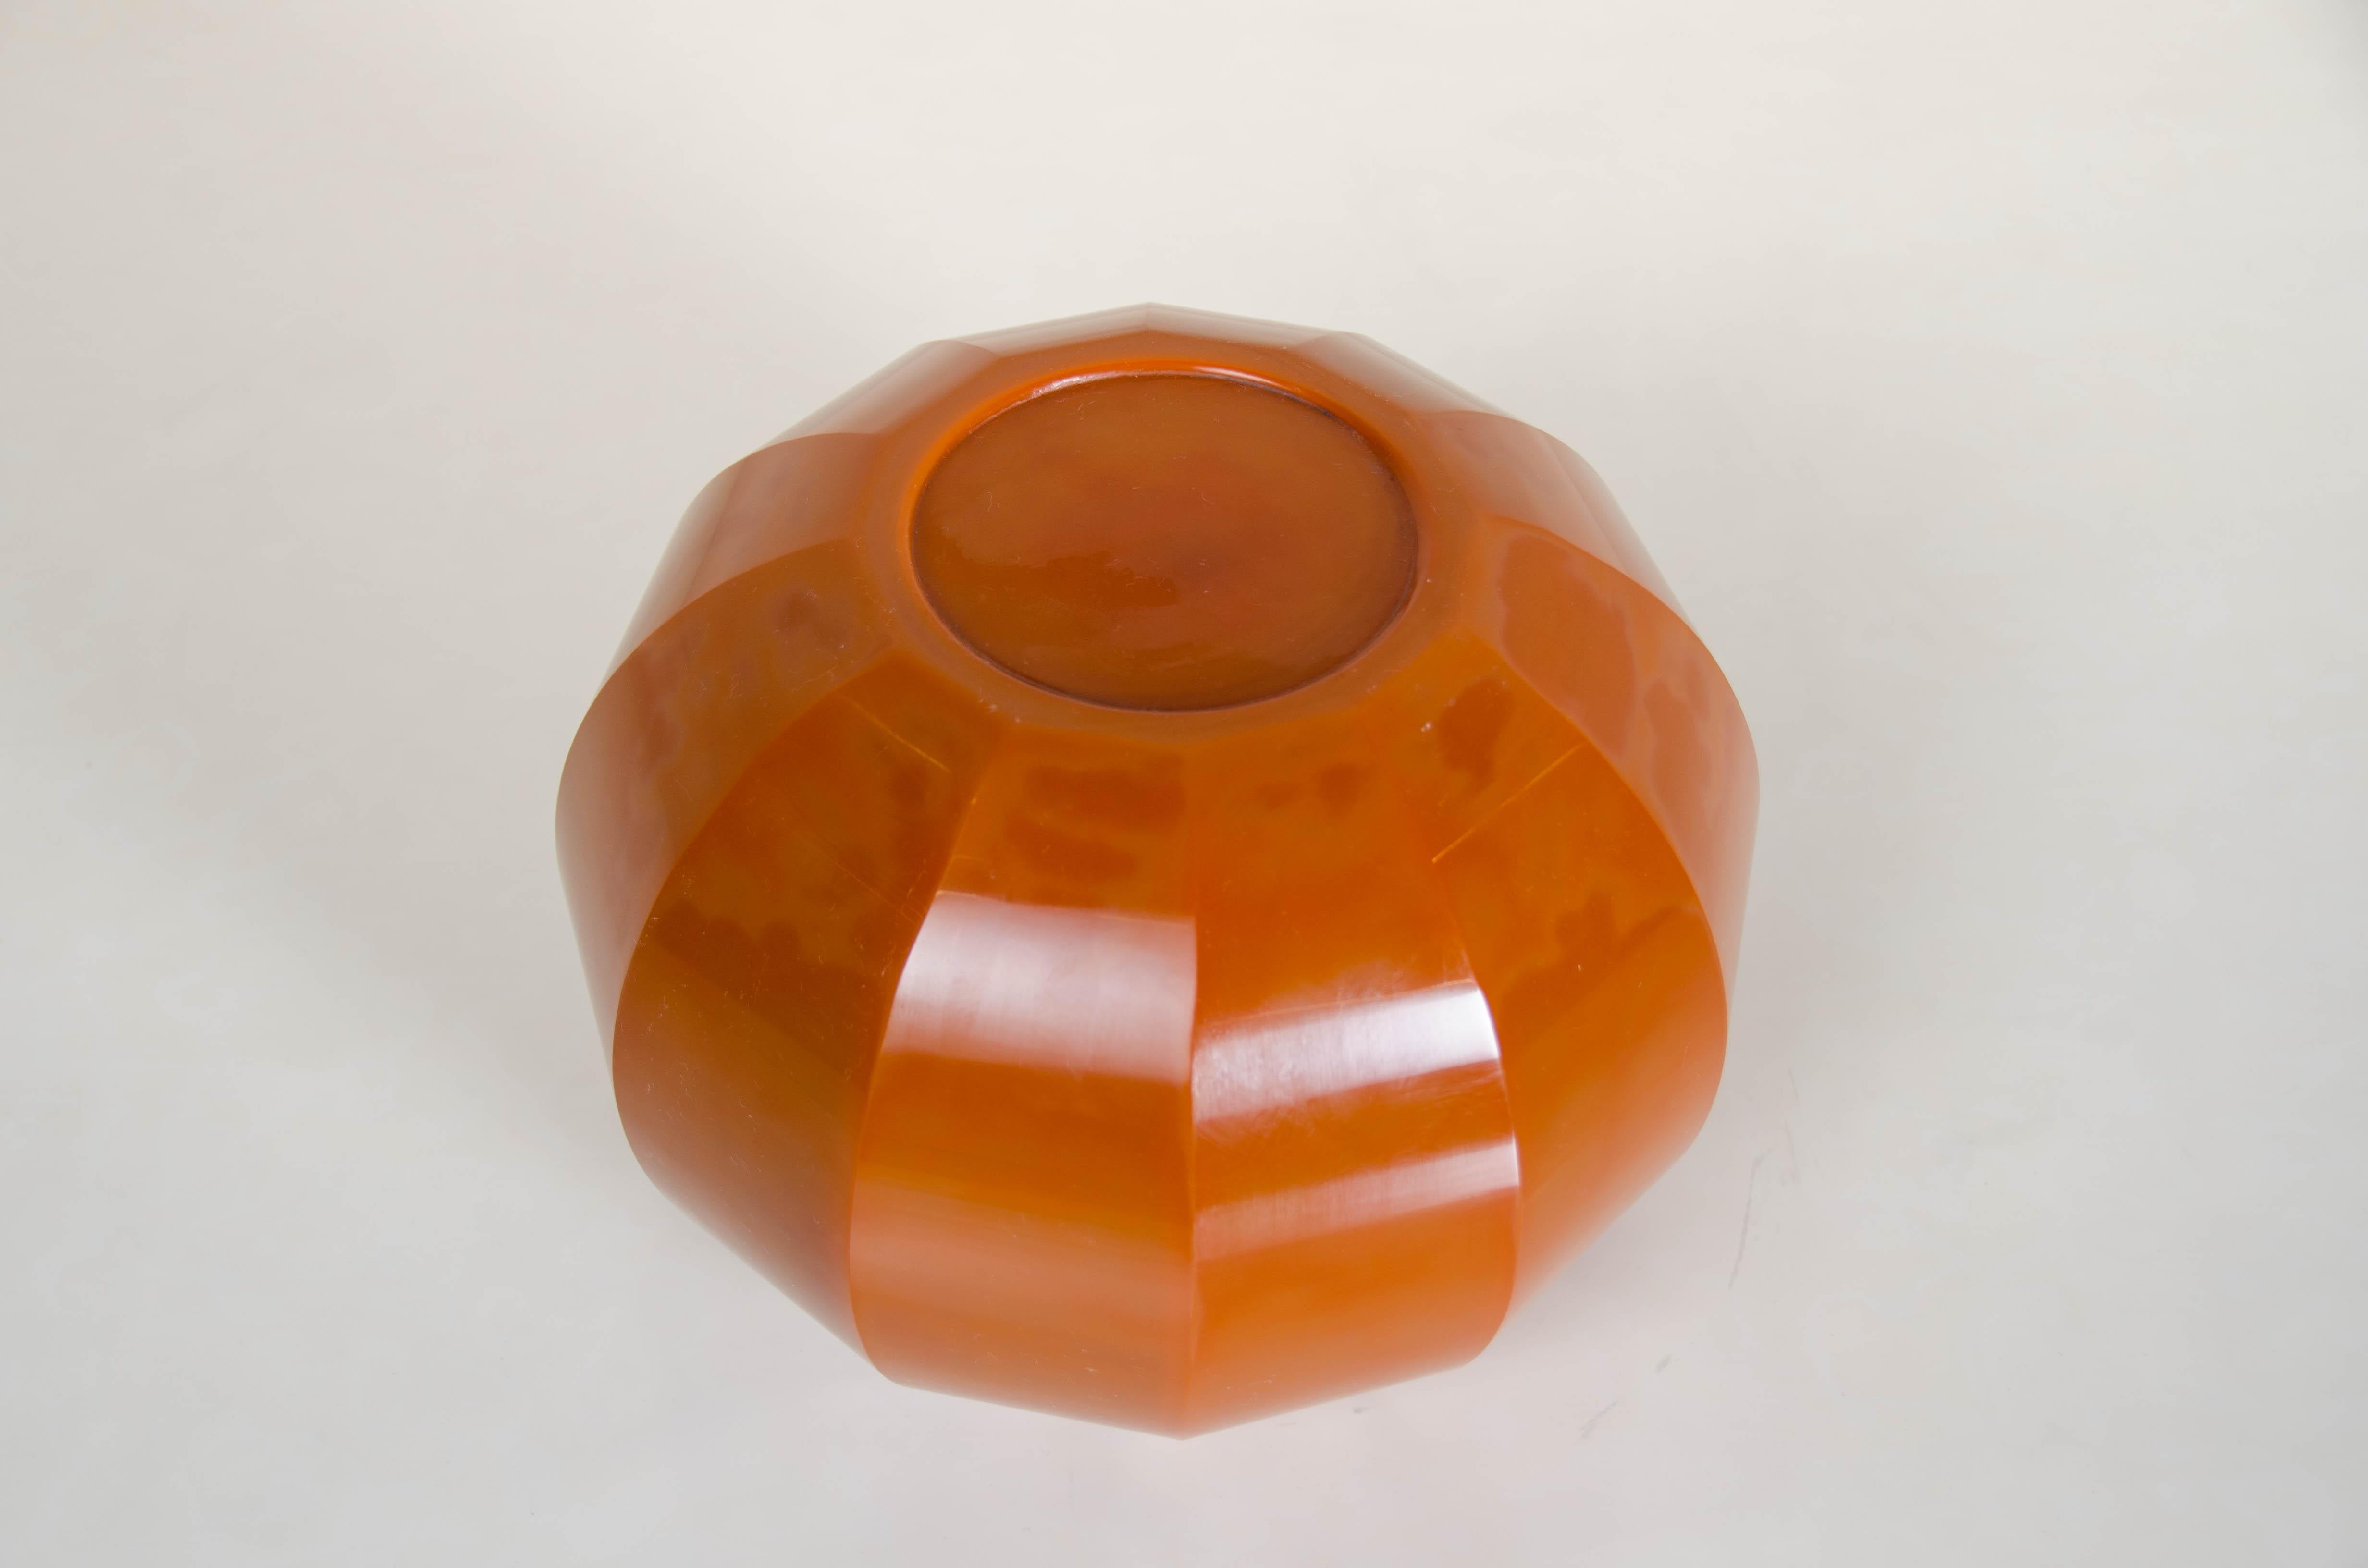 Contemporary 12 Facet Jarlet, Mila Peking Glass by Robert Kuo, Hand Blown Glass, Limited